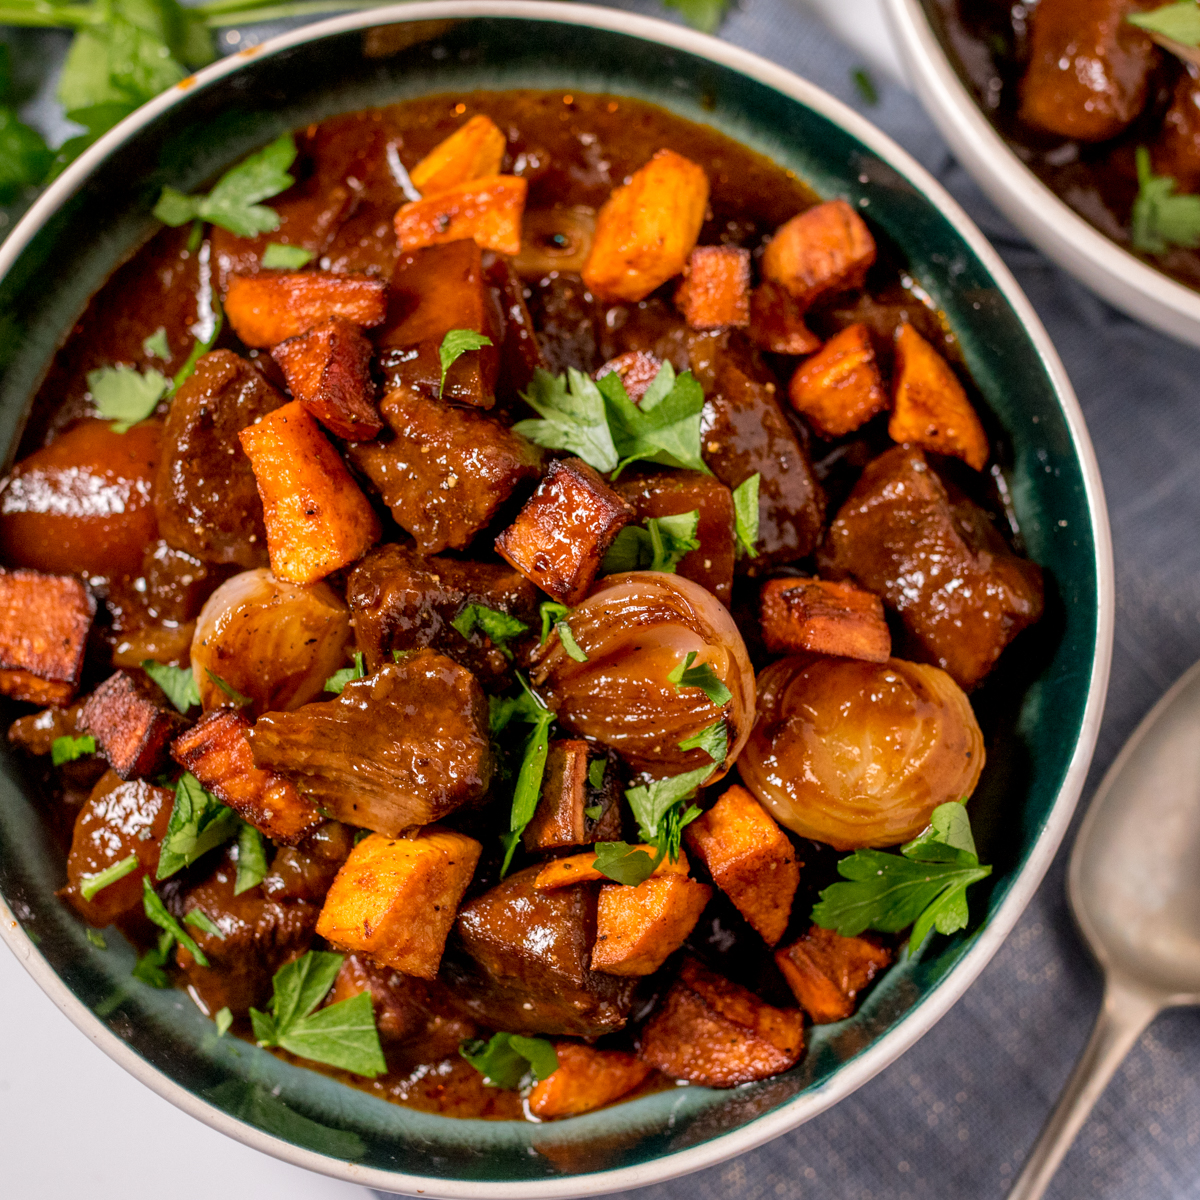 Easy Slow-Cooked Beef Stew Recipe with Roasted Sweet Potato.